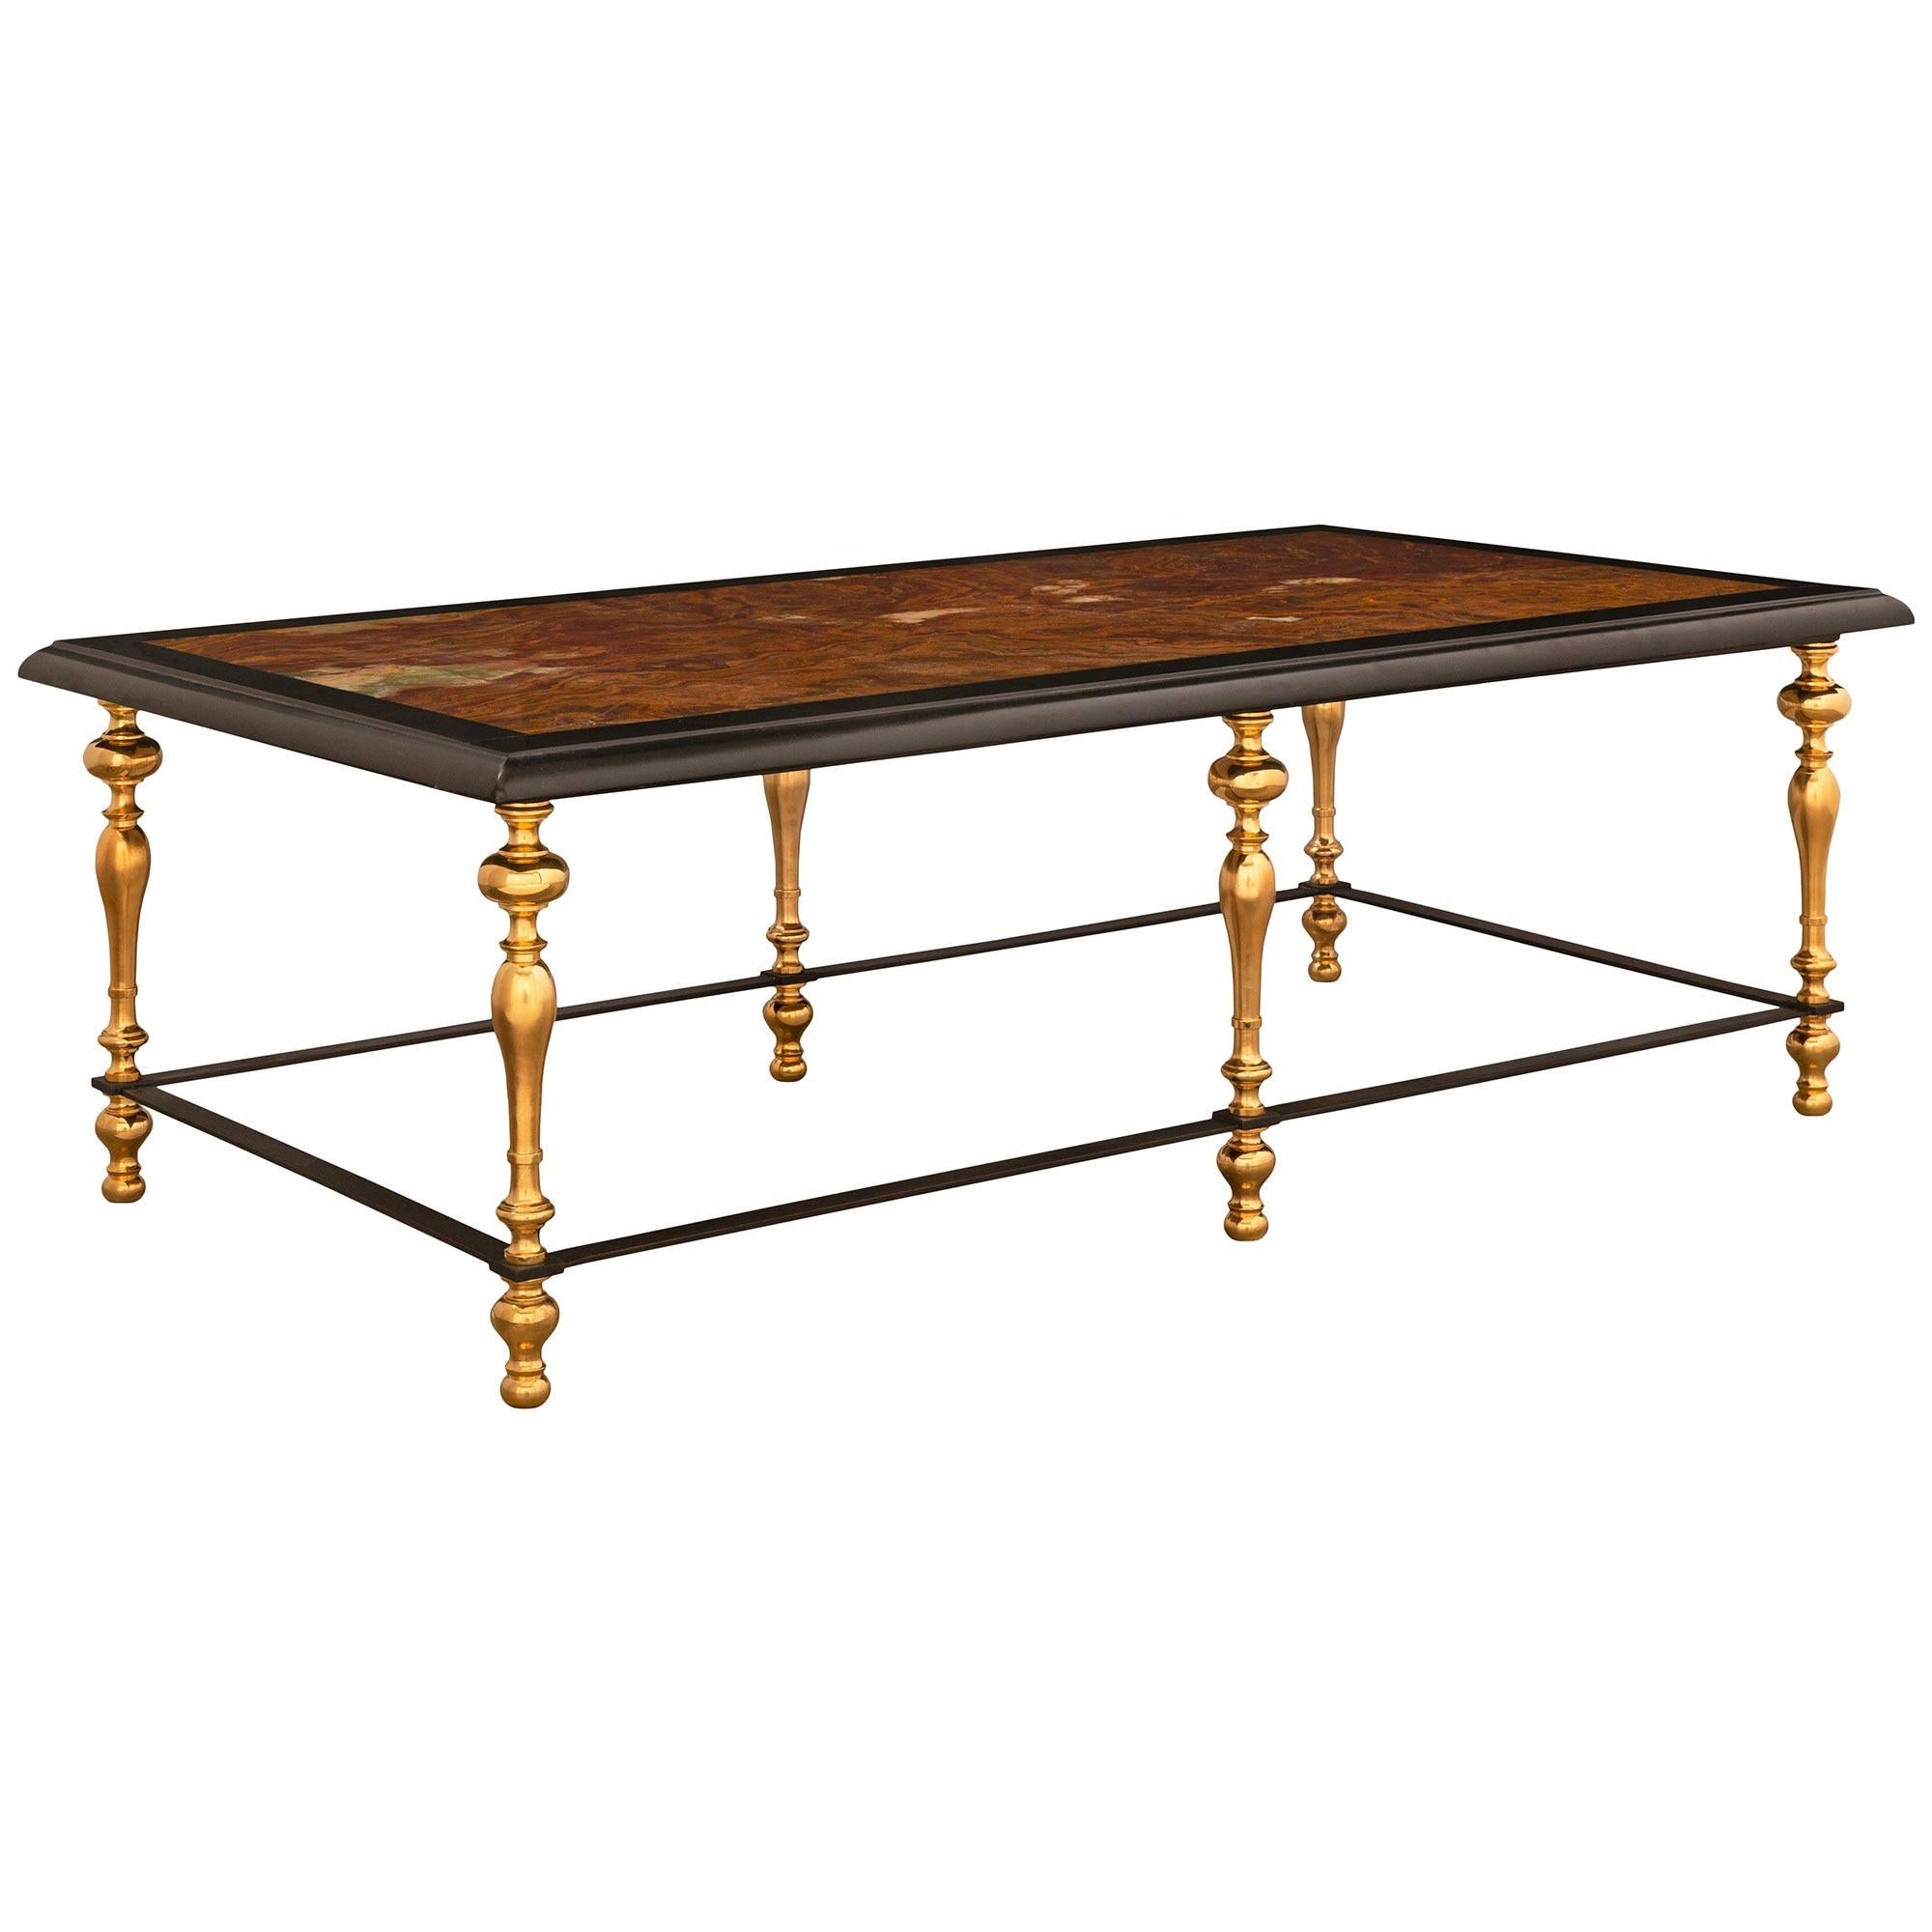 Unknown Continental 19th Century Louis XIV St. Bronze, Marble, and Ormolu Coffee Table For Sale